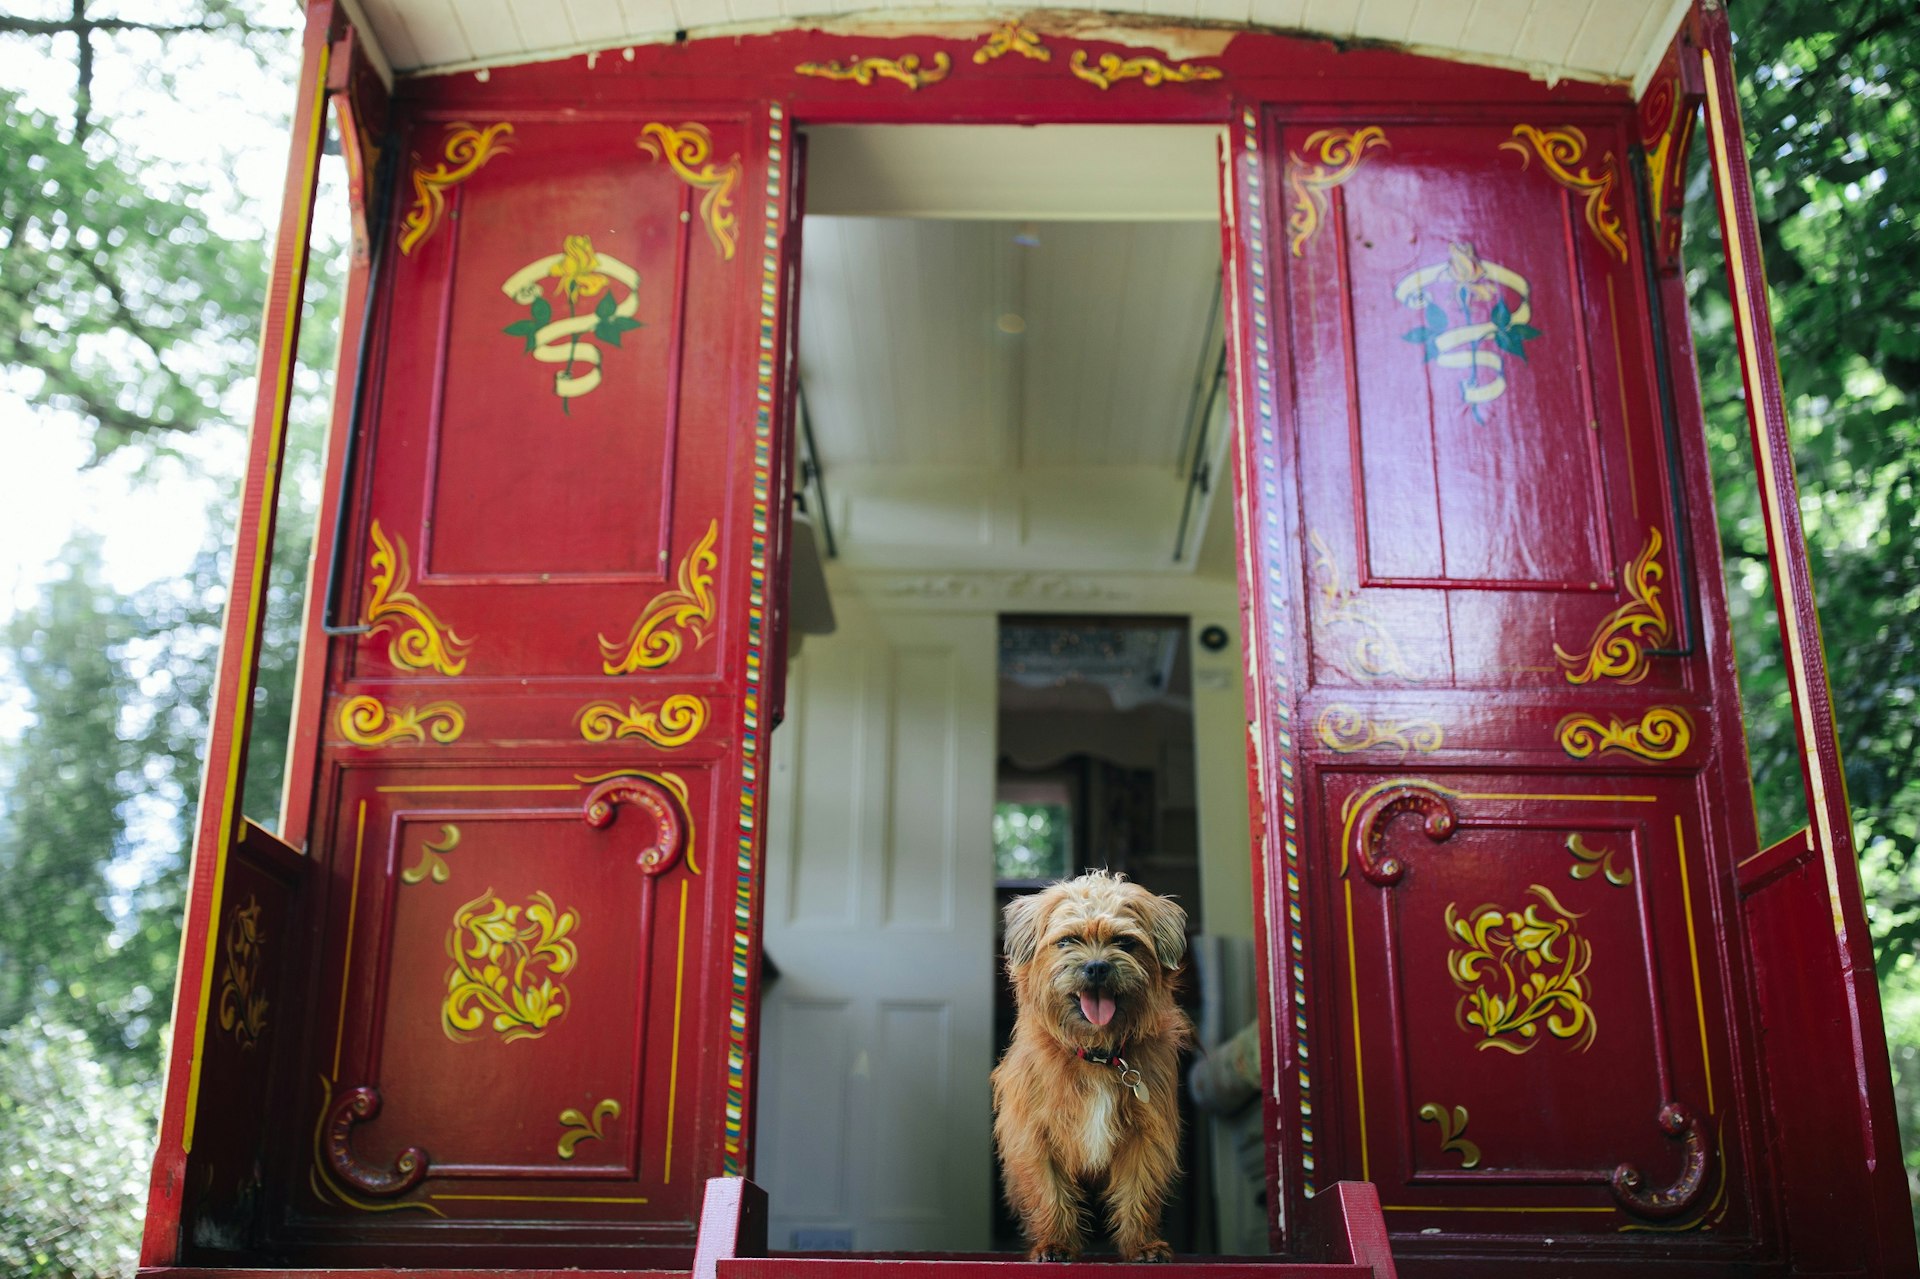 A small terrier stands on the steps of an old-fashioned red caravan with ornate decorations on the wooden doors